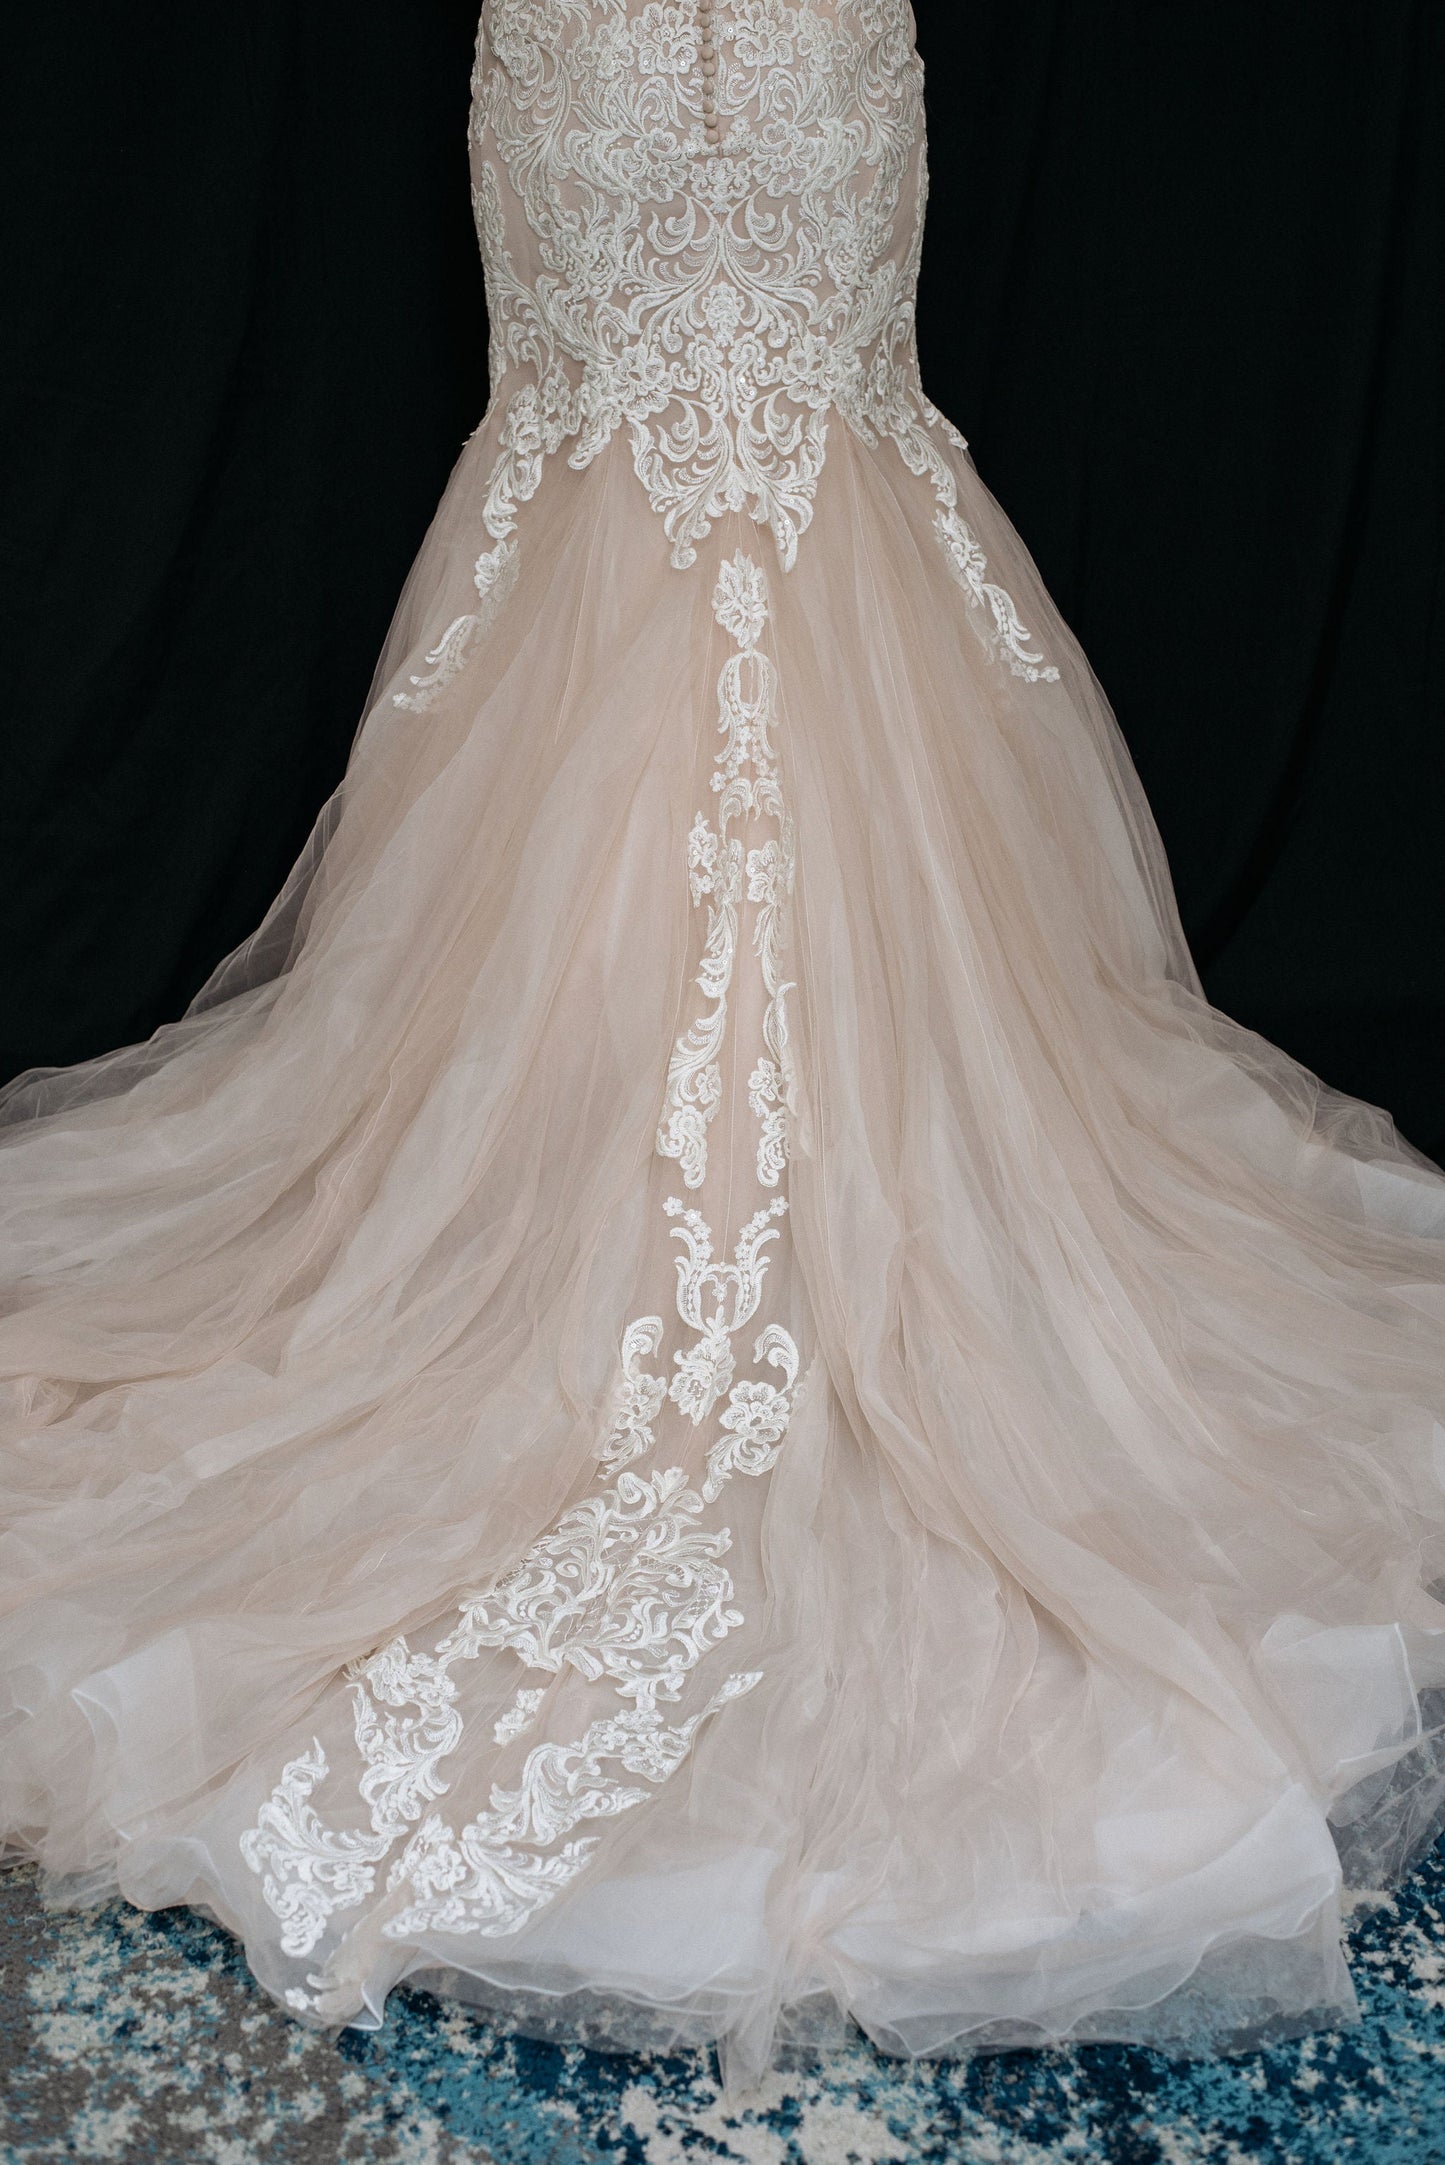 Brand New! Dress 901: Maggie Sottero "Alistaire"